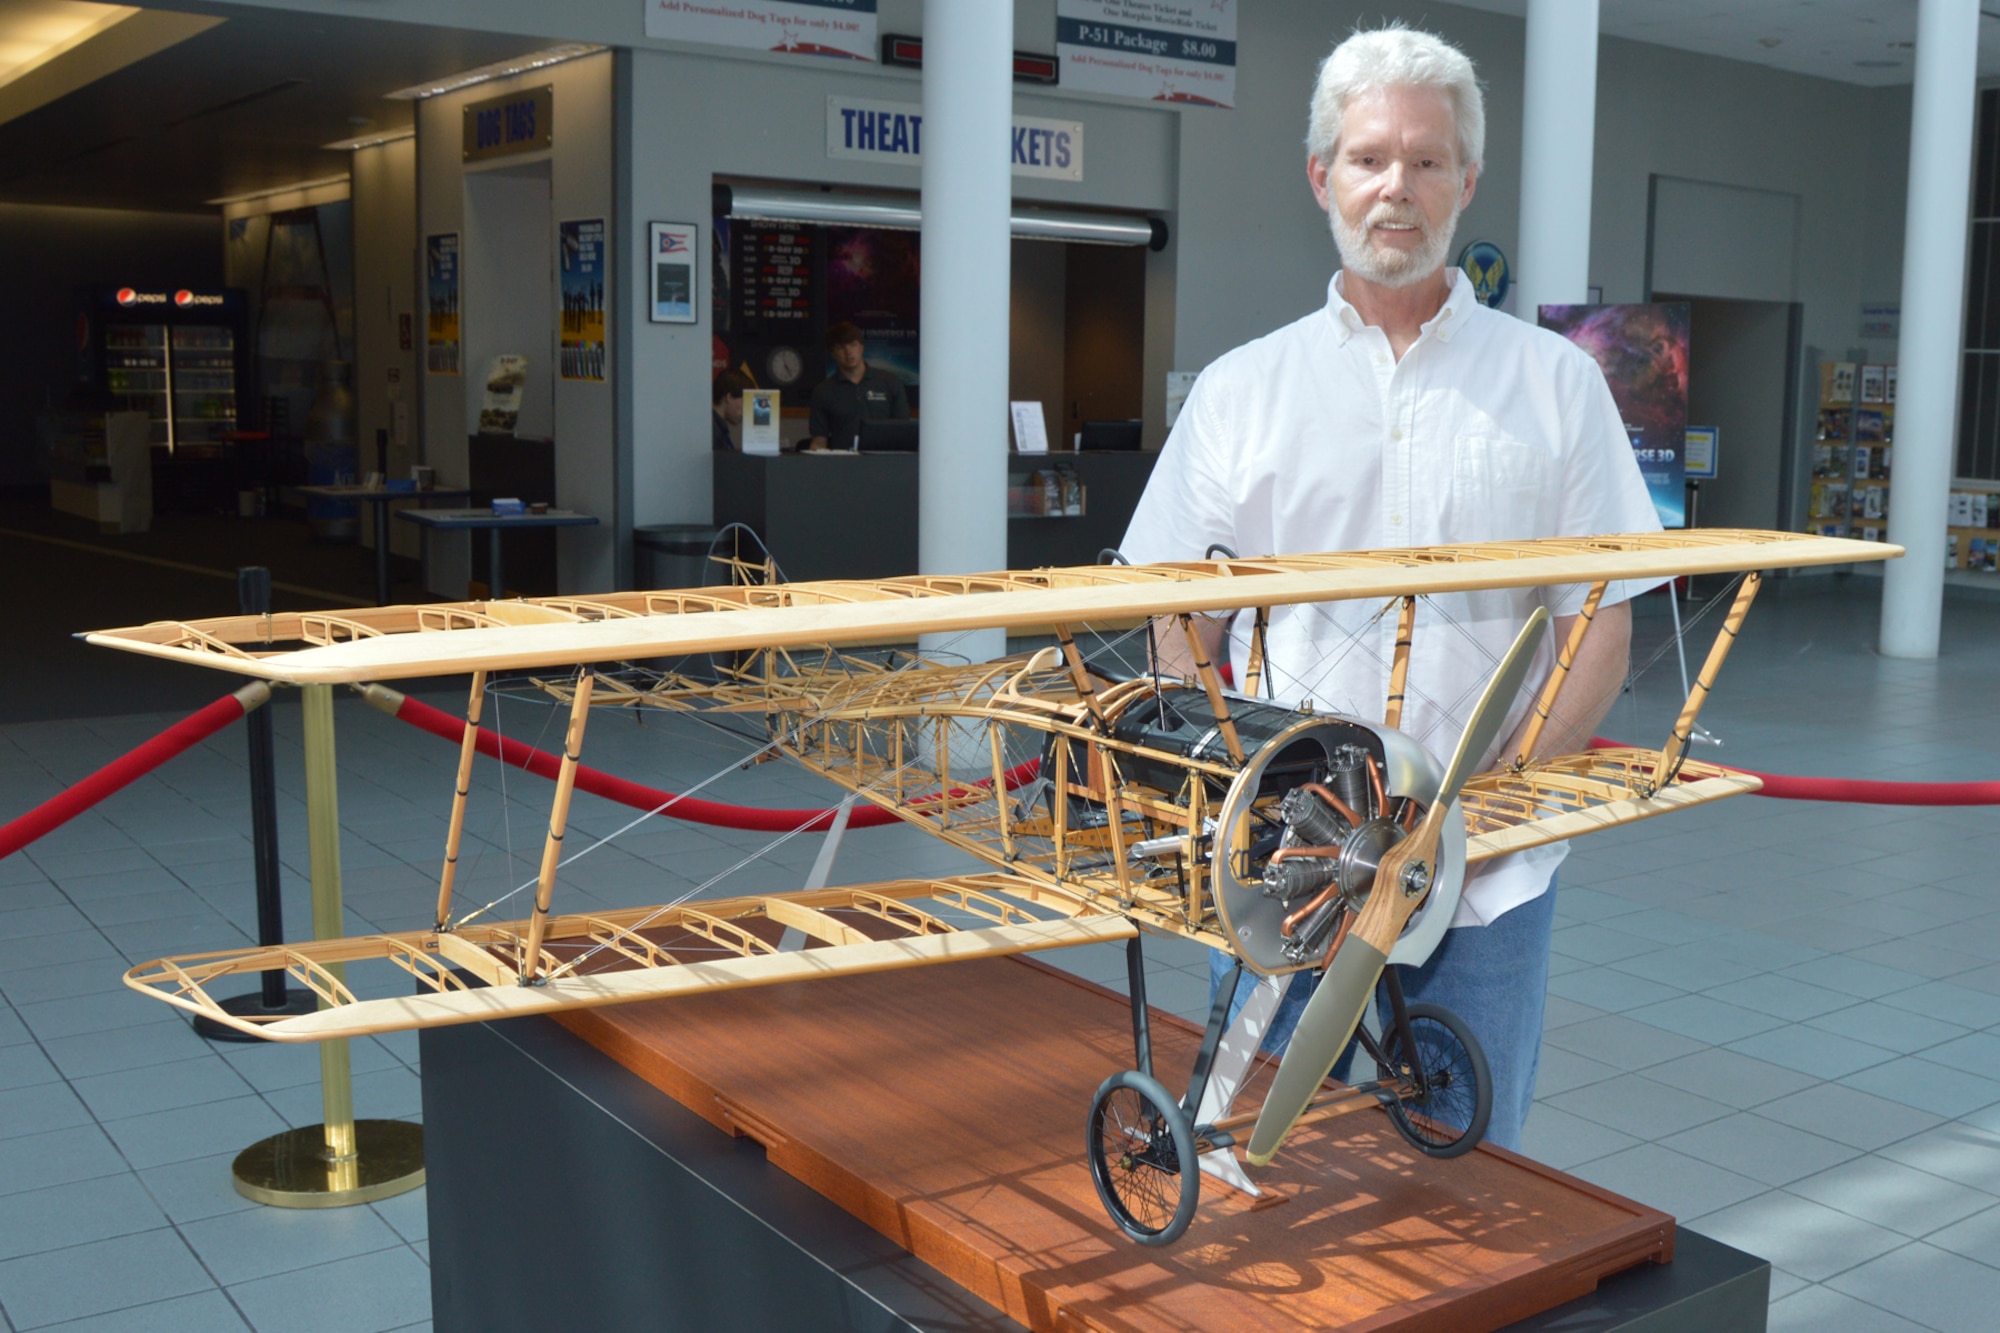 DAYTON, Ohio --  Aircraft model builder Don Gentry donated his 1/5 scale model of a Thomas-Morse S4C Scout to the National Museum of the U.S. Air Force. Fabrication involved roughly 7,000 man hours spread over 5 years, scratch built by Gentry. Plans call for the model to be on display in the museum's Early Years Gallery. (U.S. Air Force photo by Ken LaRock) 
